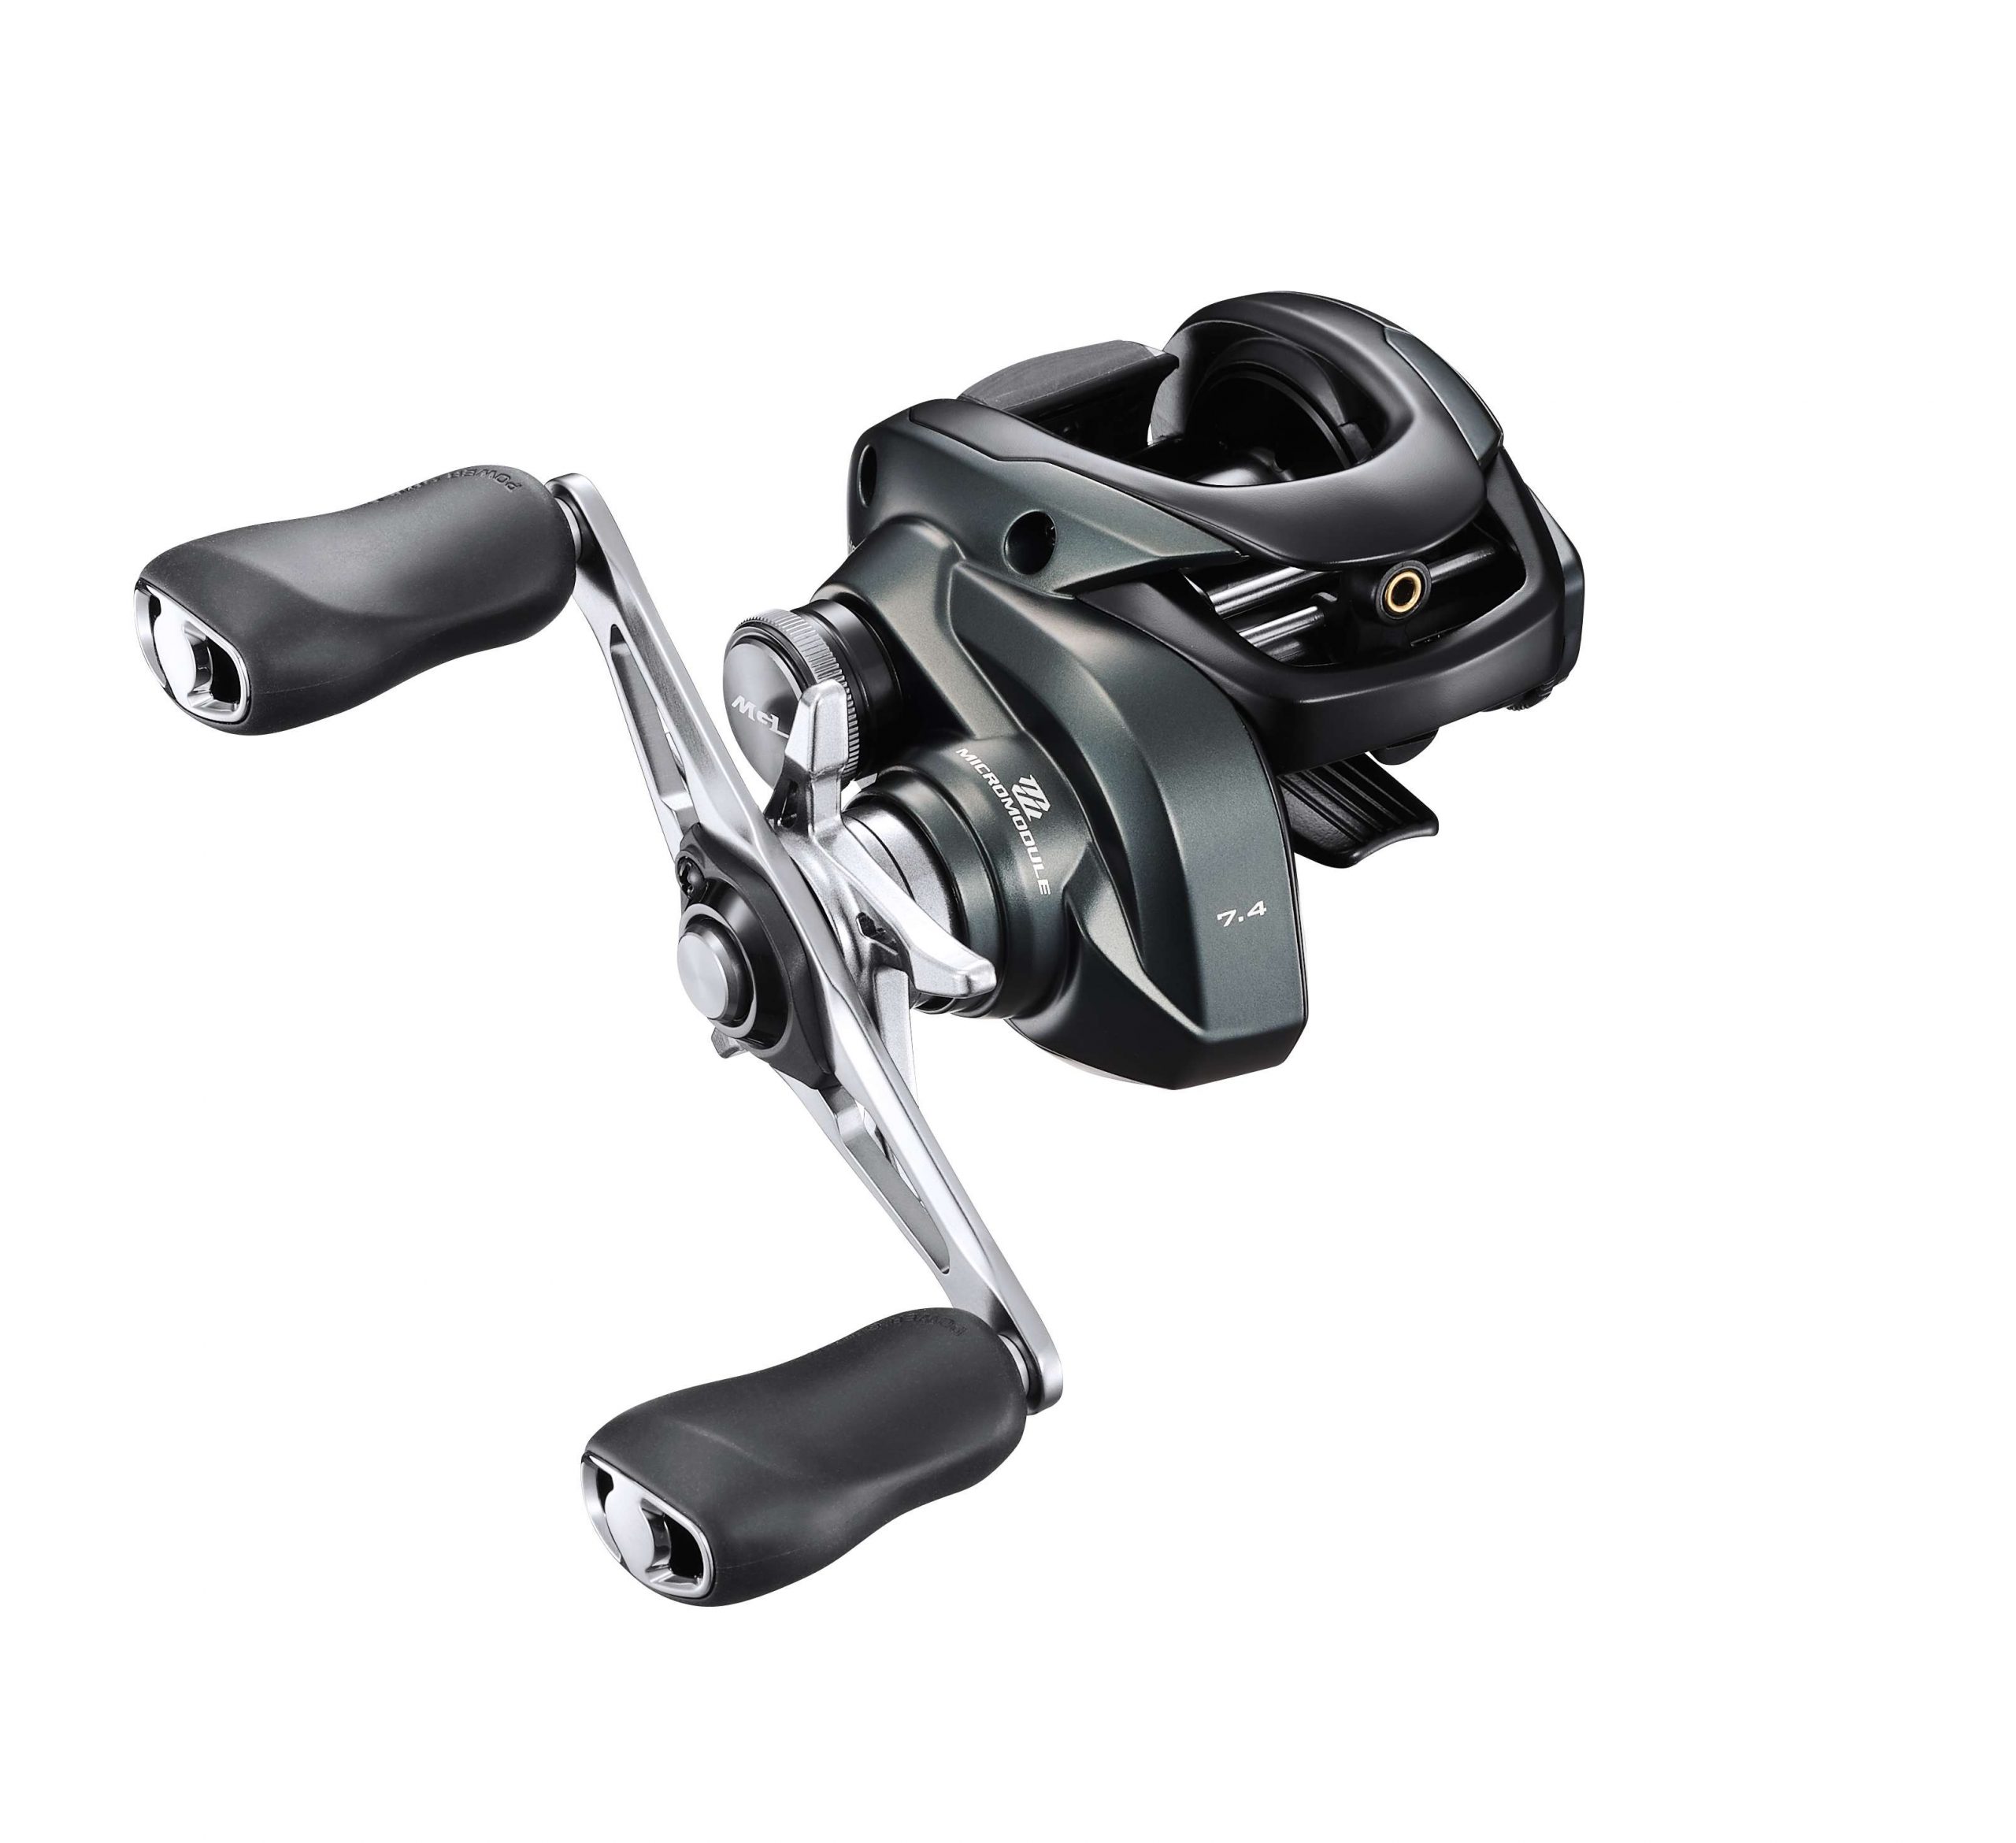 <p><strong>Shimano Curado MGL 150</strong></p><p>The tournament-tested Curado adds a 150-sized spool version with the MagnumLite (MGL) spool technology, allowing anglers to fish different techniques with various lure categories and sizes with ease, with greater casting distance and accuracy.</p><p>Precision gearing, X-Ship, MicroModule Gearing and SilentTune all create an unmatched reeling experience. $199.99. <a href=